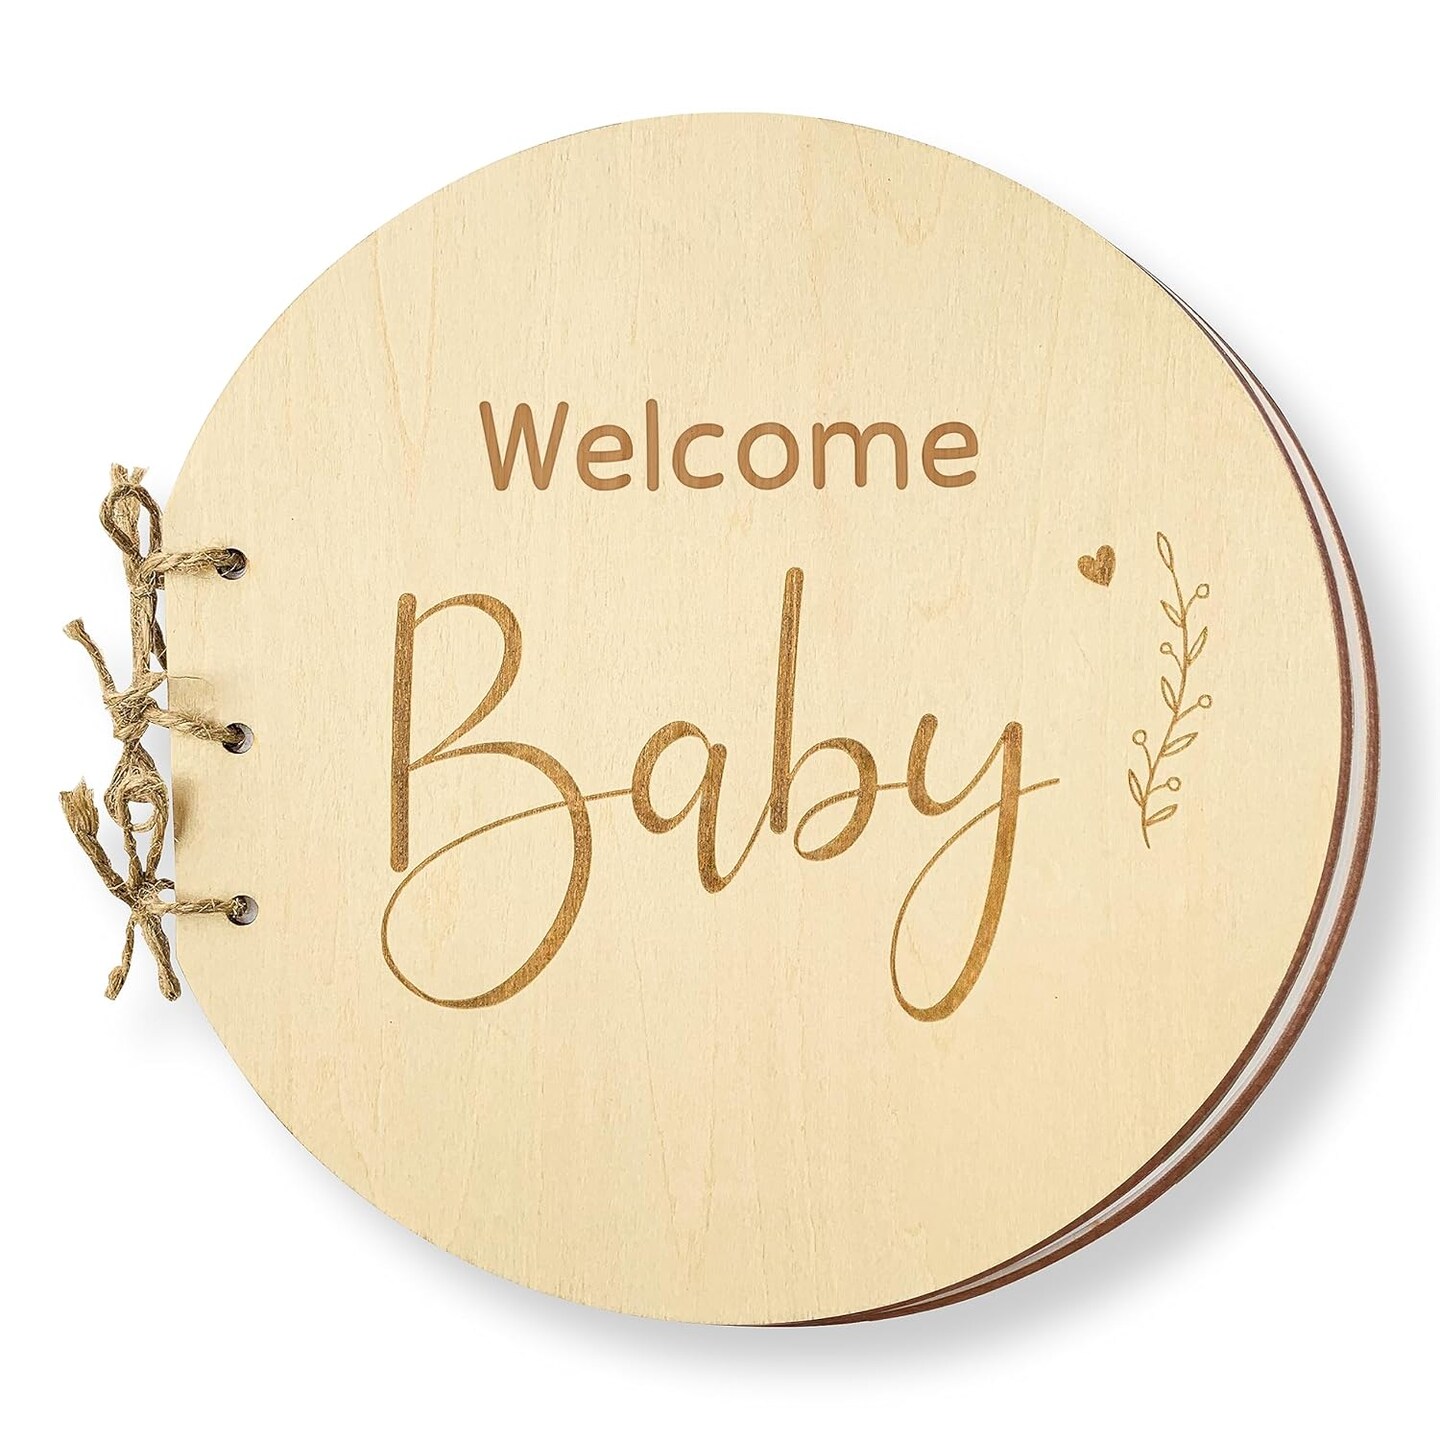 Baby Shower Guest Book Alternatives - Baby Shower Games Activities, Baby Shower Sign in Guest Book, Baby Shower Book Guest for Girl Boy, Wood Advice Guestbook Keepsake Gift for Mom